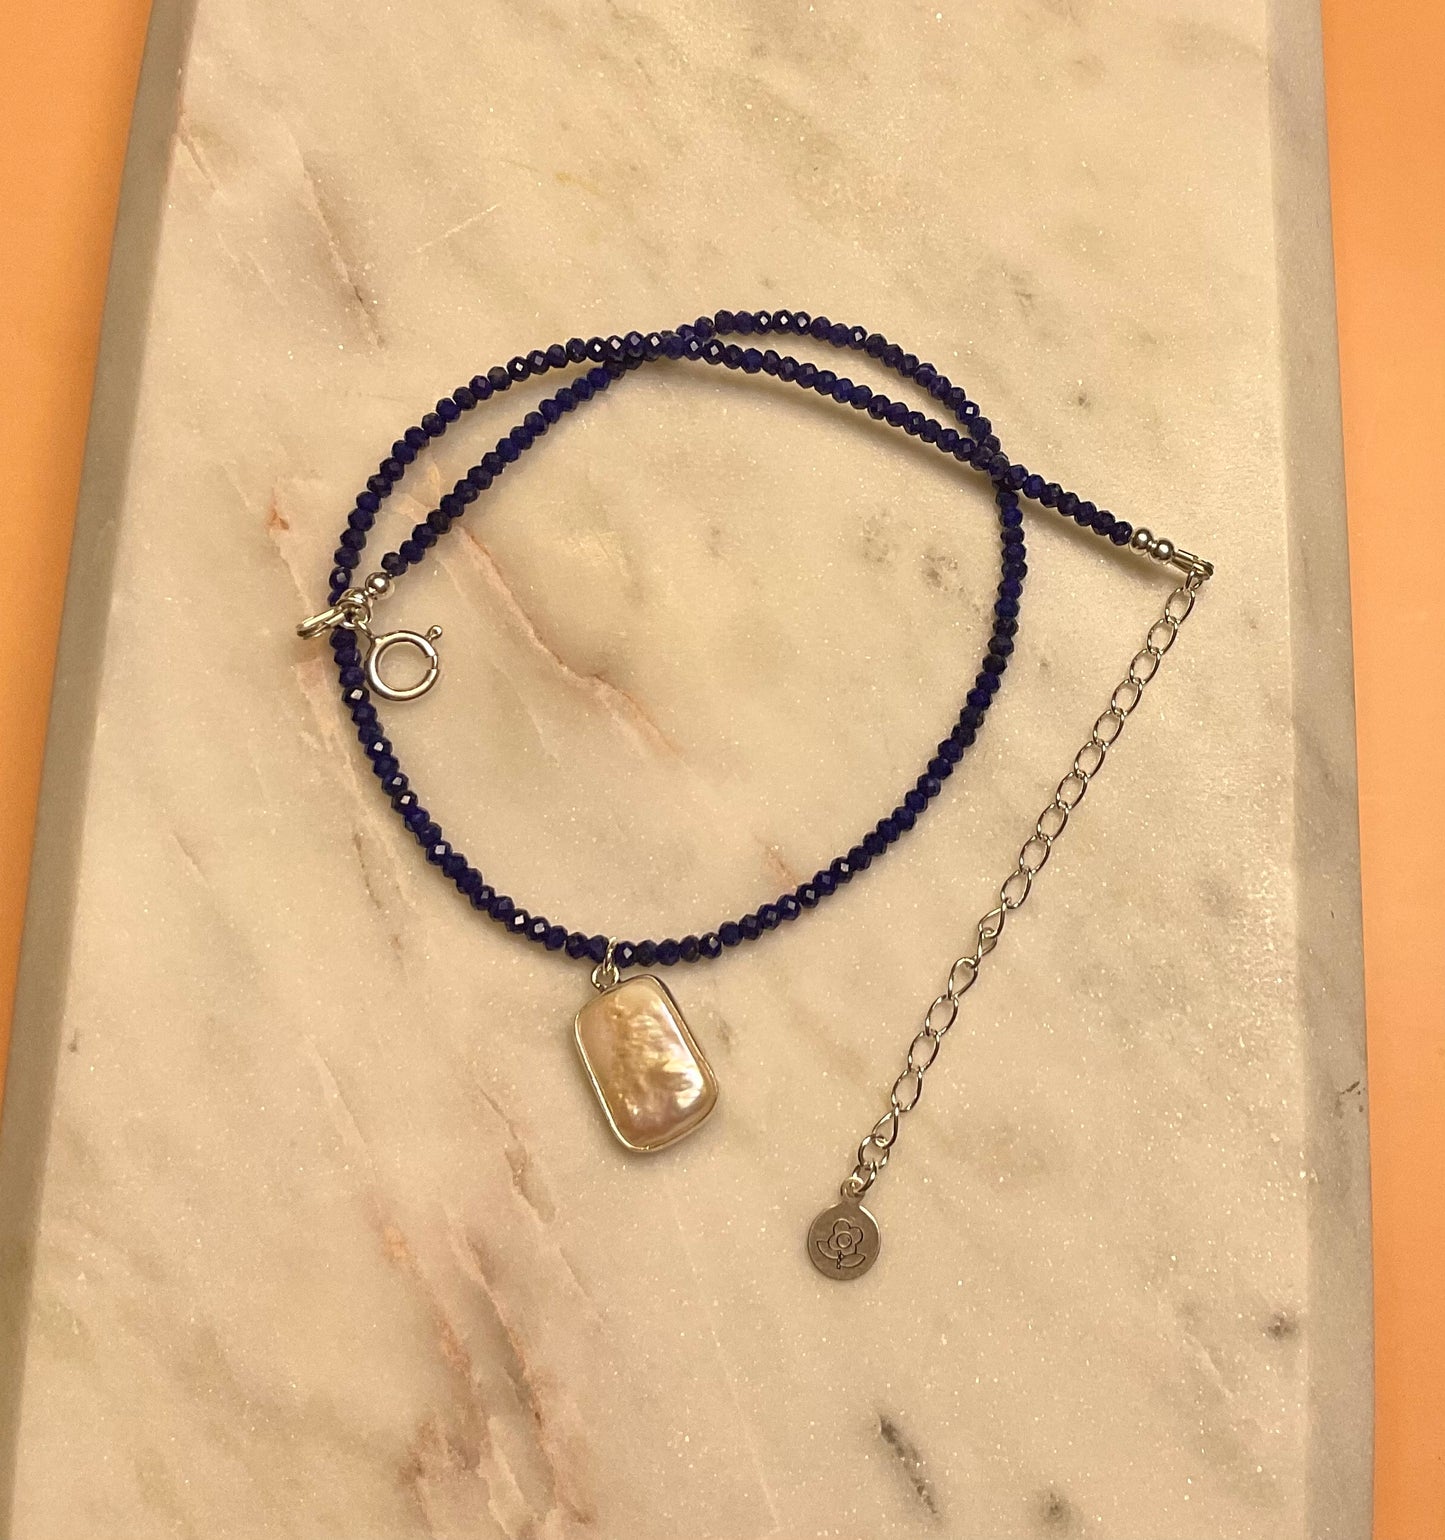 Micro Faceted Lapis Lazuli Gemstone Necklace with Pearl Pendant